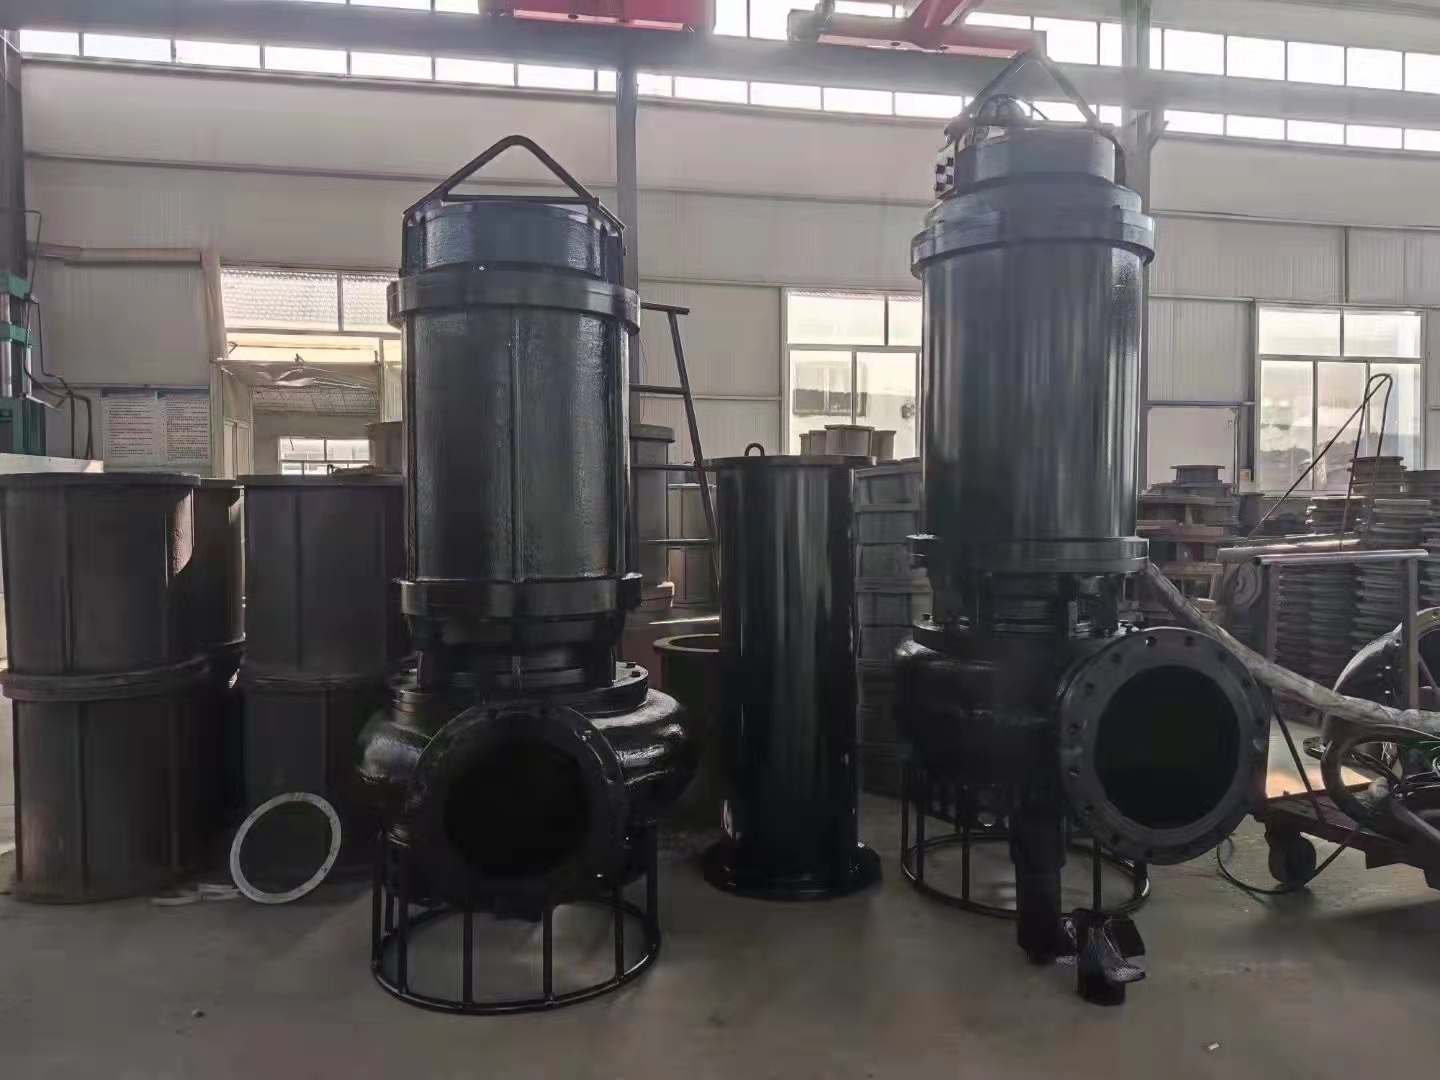 Submersible slurry pump wear-resistant sand pump for sewage treatment, hinged electric sand pump